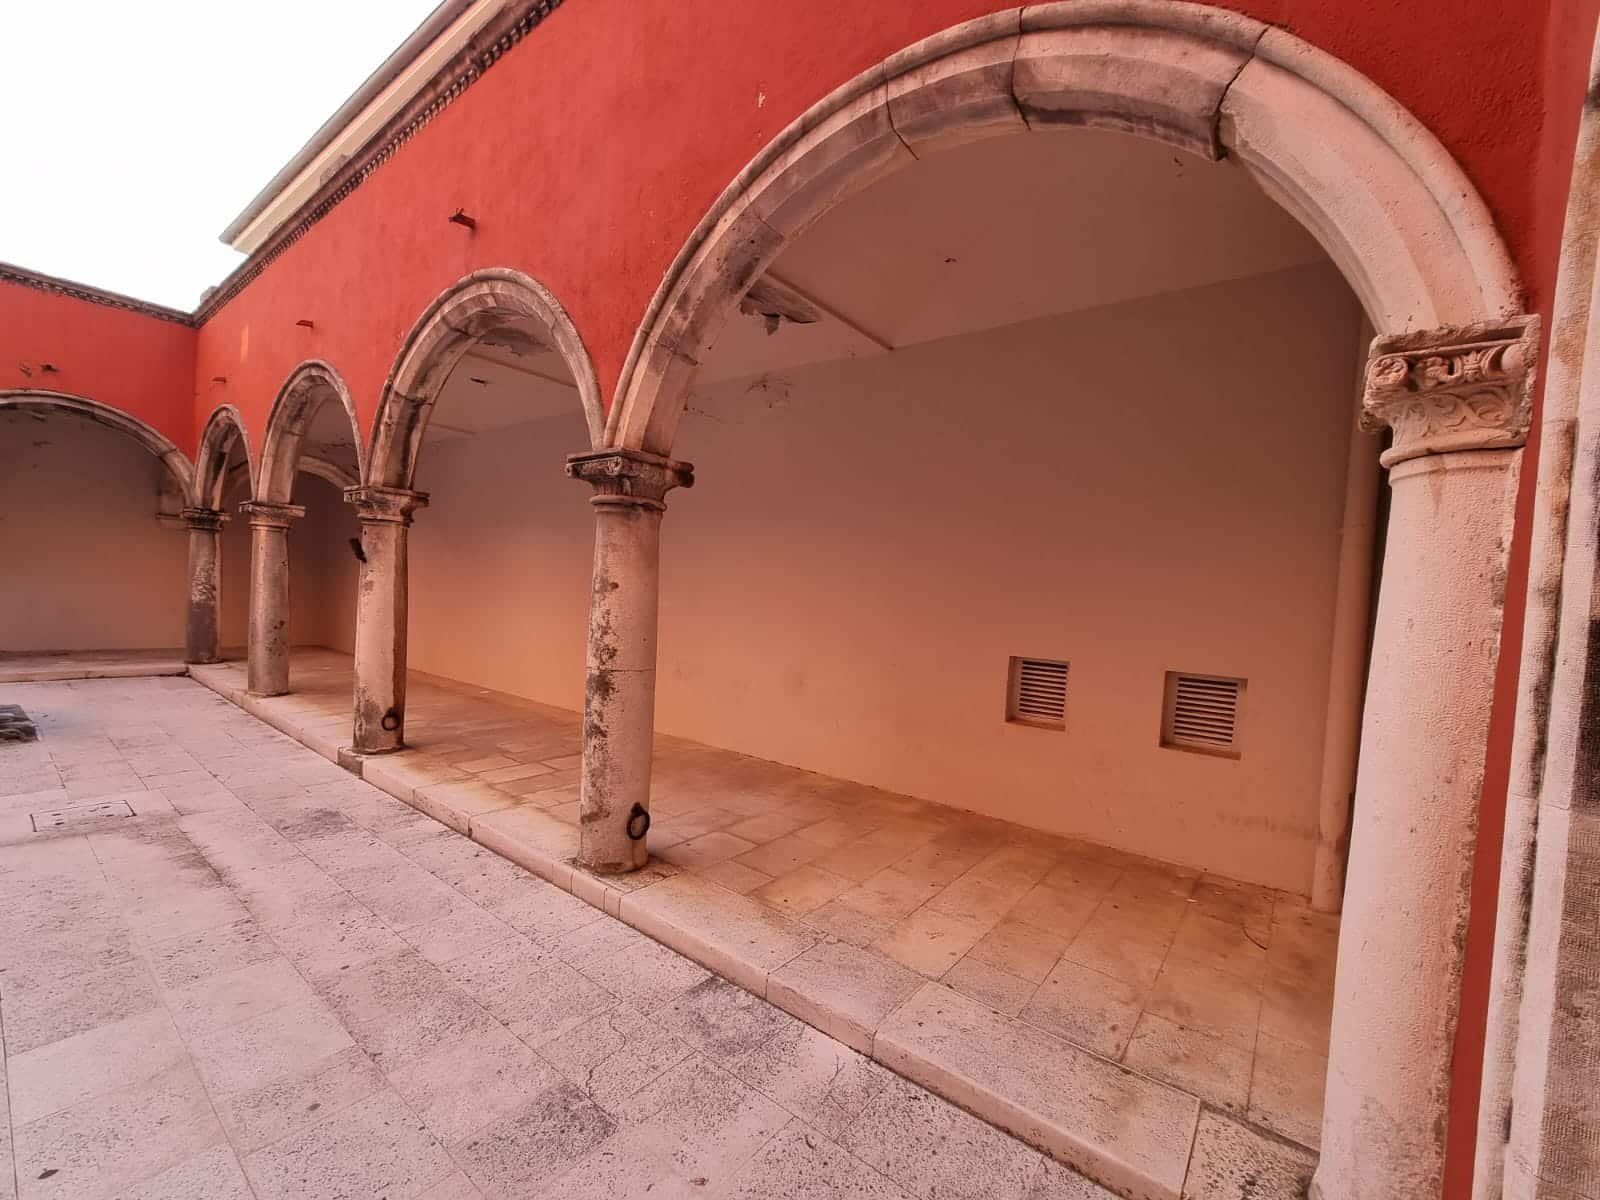 Traveling in Croatia tips - Go to Zadar. The first time I stepped into the courtyard of a building, I was in awe of the magnificent arches and pillars that adorned the space.